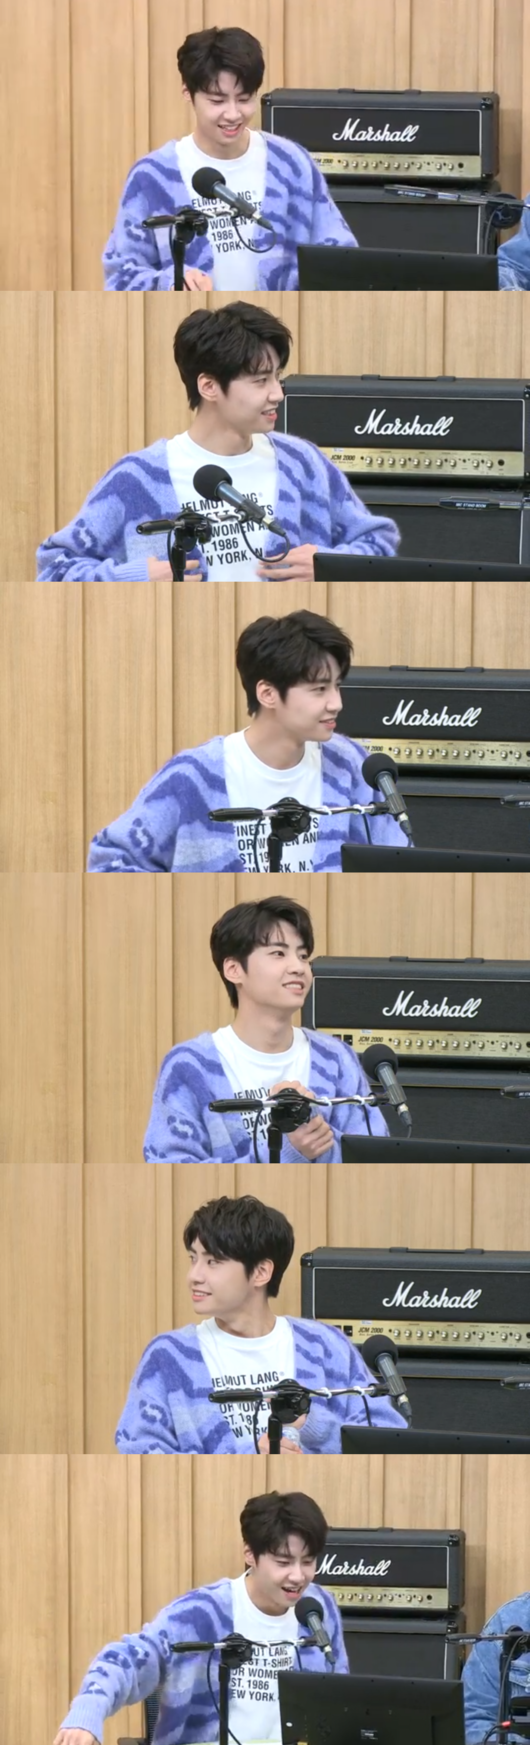 Lee Jin-hyuk, who appeared on the TV Cultwo Show, lost his sweat between the role models Lee Jin-hyuk and Yunho; the fans were even more cute.Lee Jin-hyuk came out as a guest on SBS Power FM Dooshi Escape TV Cultwo Show which was broadcast live at 3 pm on the 6th.I was back on TV Cultwo Show in five months. I had my first album and had a fan meeting abroad.The COVID-19 incident happened when I went there, he said.Lee Jin-hyuk appeared on SBS All The Butlers, which was broadcast the previous day, as a daily student and met Lee Seung-gi, Yang Se-hyung, Shin Sung-rok and Kim Dong-hyun.Yesterday, it was broadcast. I was in the top spot in real-time search. I was surprised to see the article, he said.The listener asked, I talked about Lee Seung-gi in the role model in All The Butlers, but was not it Yunho originally? Who is the real one?Lee Jin-hyuk said, I will be watching you now because I have been in touch with you until yesterday.Kim Tae-kyun and Moon Se-yoon asked him to launch a video letter; Lee Jin-hyuk first told Yunho, Yunho, I really admire you.Lee Jin-hyuk, who is following the passionate figure on stage, and I want to visit him and tell him that he is a role model. I love you.If youre listening to the radio, please call me, Im on your side here, Lee Seung-gi said, and drew attention with his thumbs up.Lee Jin-hyuk smiled, saying, I am so nervous now as Yunho and Lee Seung-gi continued to be mentioned.Nevertheless, questions related to Lee Seung-gi and Yunho were repeatedly asked. Lee Jin-hyuk said, For Idol, TVXQ Yunho is also the best.Lee Seung-gi is the best for entertainment and acting. Kim Tae-kyun laughed when he pointed out that Yunho plays too. He asked, What is funny about acting and entertainment? There is Lee Jin-hyuk of entertainment, Lee Jin-hyuk of drama, and Lee Jin-hyuk of stage.There are many different kinds of brilliant Lee Jin-hyuk. Its funny, honestly.I like the villain, he said, and I like the school drama, which is good for expressing my own color. In fact, my personality is a little quiet.If youre going to blow up all your energy on the air, its going to stretch out at home, he said.Listeners heard Lee Jin-hyuks solo song Billon and said, I want to see the stage. Lee Jin-hyuk said, I want to get on stage too quickly, just boiling.Its different when you go up to the stage without thinking about it under the stage. Its a stage constitution even though it floats a lot.SNS